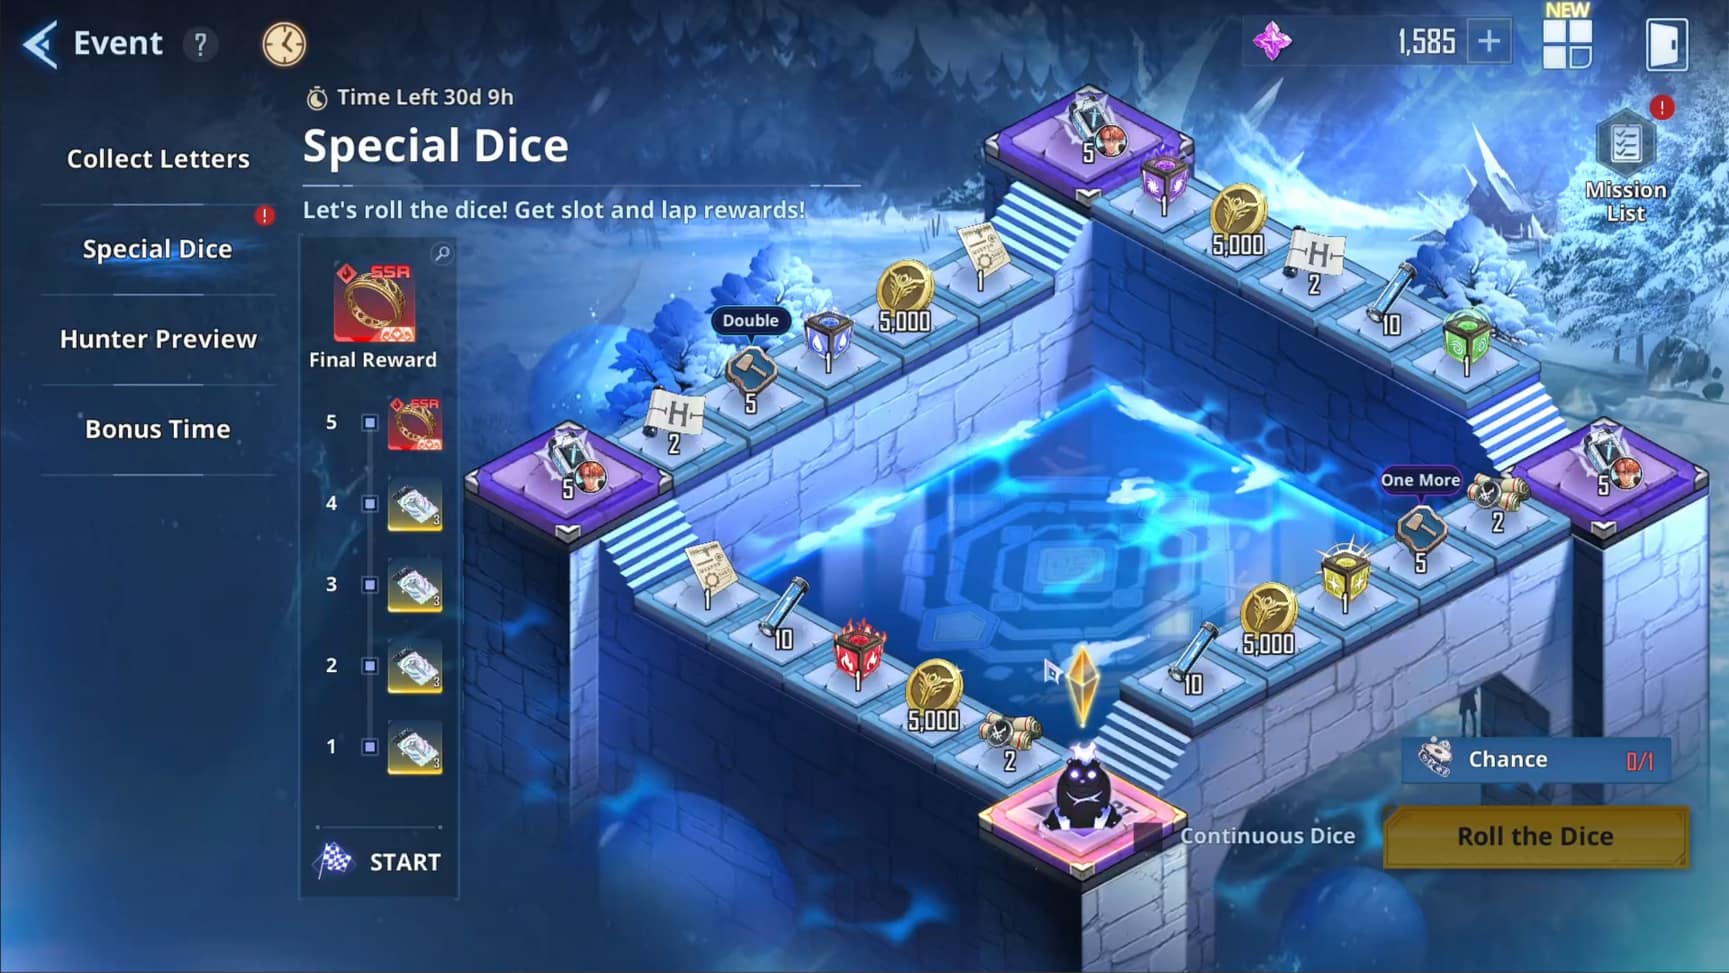 The Special Dice minigame will allow you to obtain all kinds of items and artifacts. Screenshot by Dot Esports